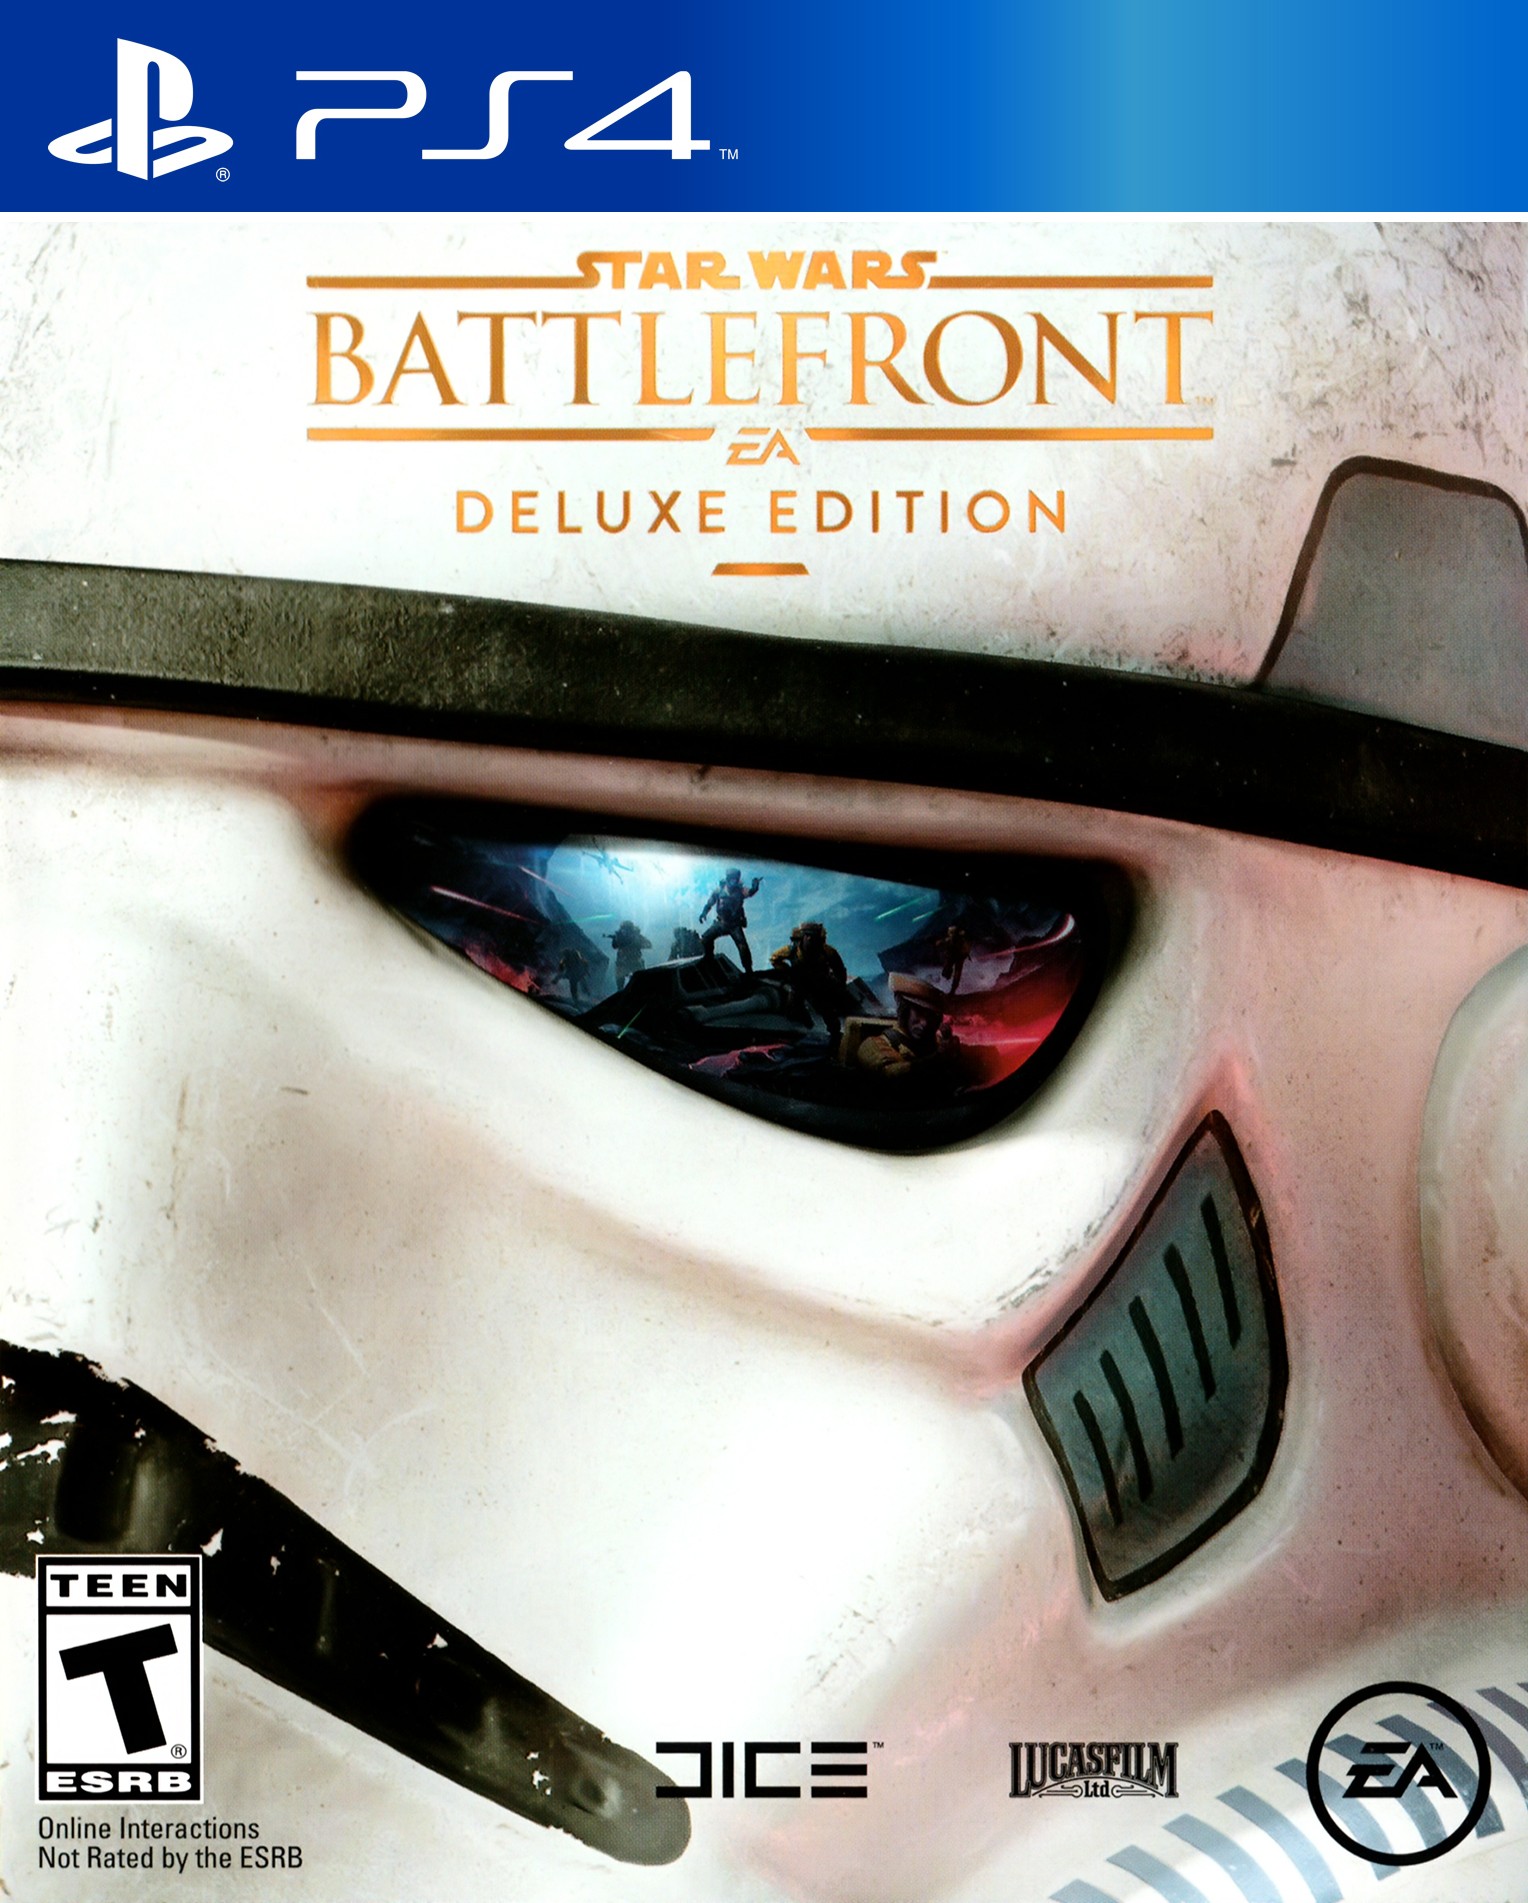 'Star Wars: Battlefront Deluxe Edition'